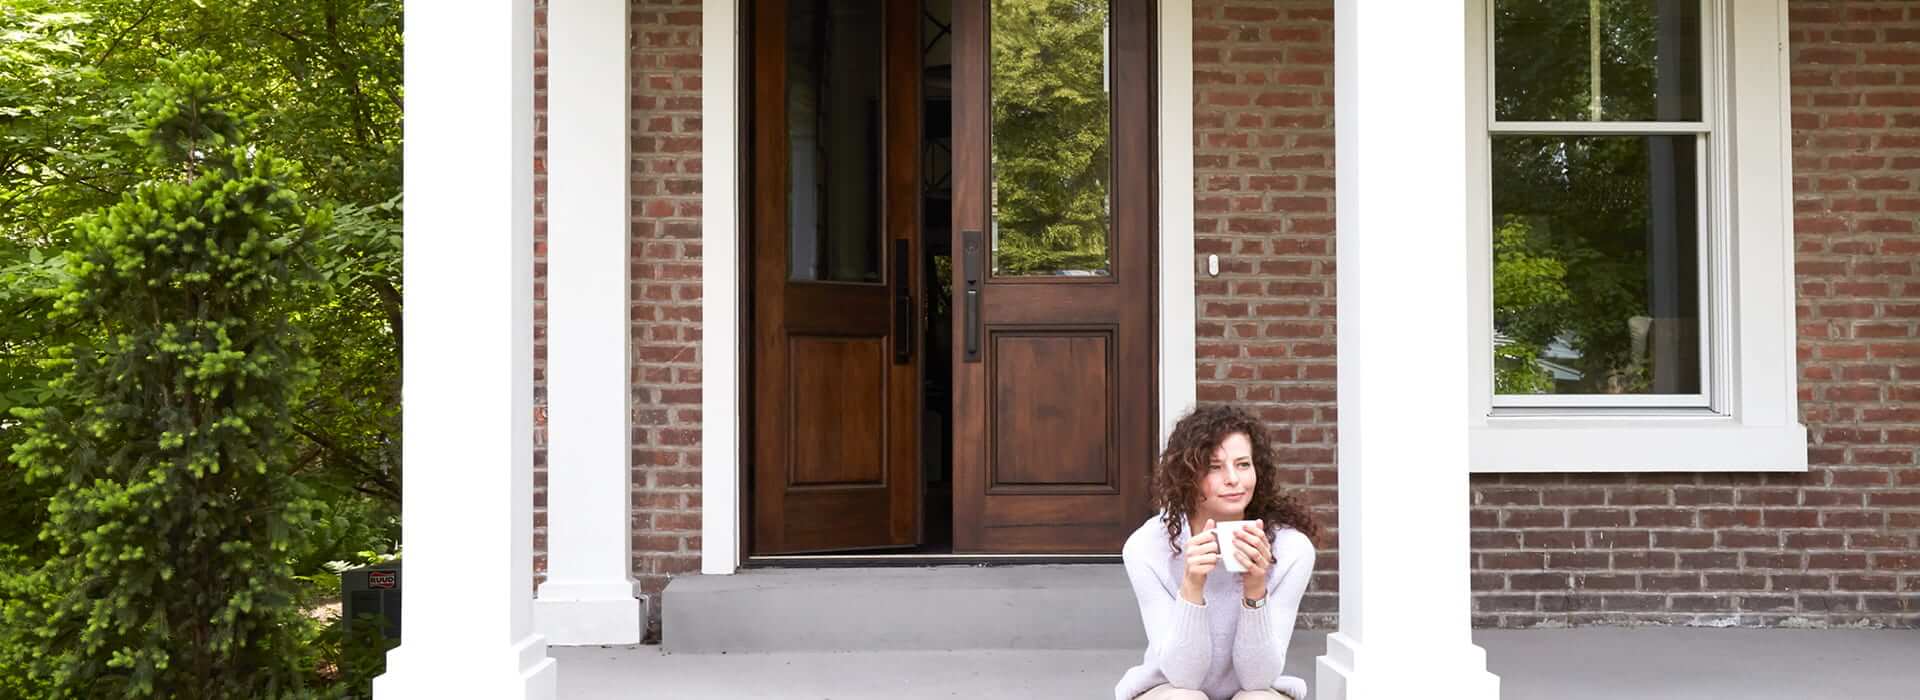 woman sitting on the porch of a home with weather resistant products